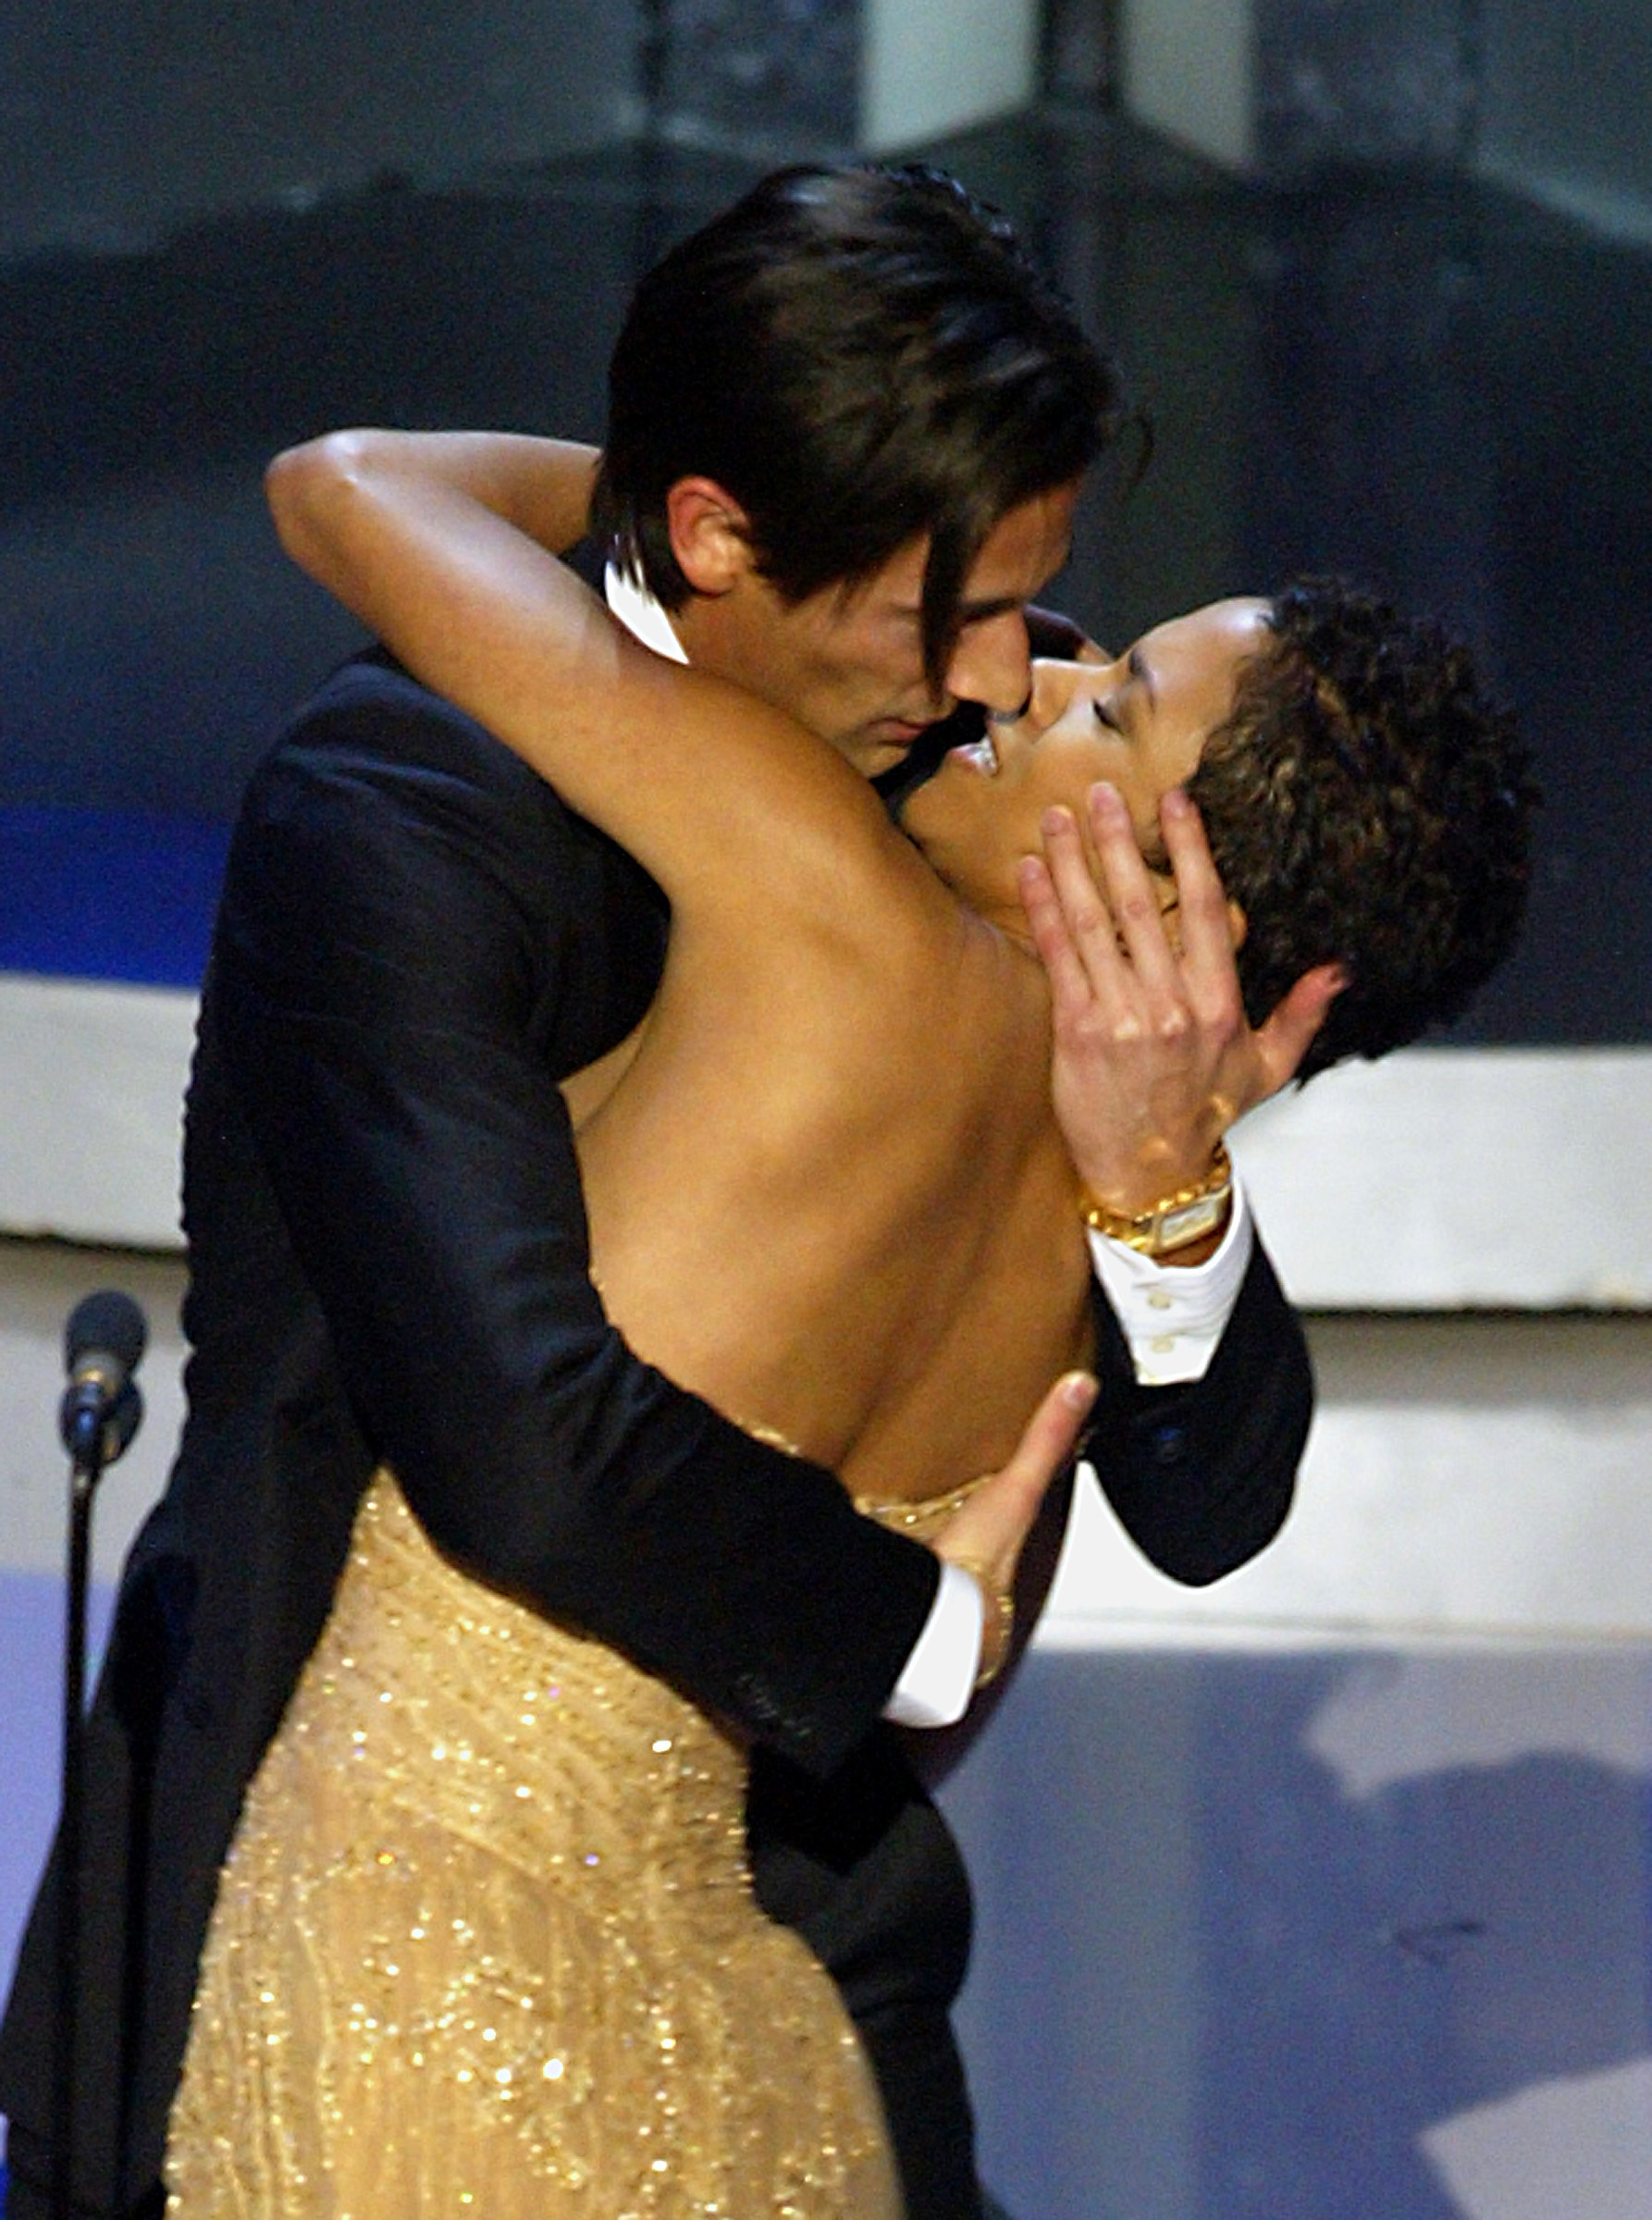 Adrien Brody attempting to kiss Halle Berry on stage